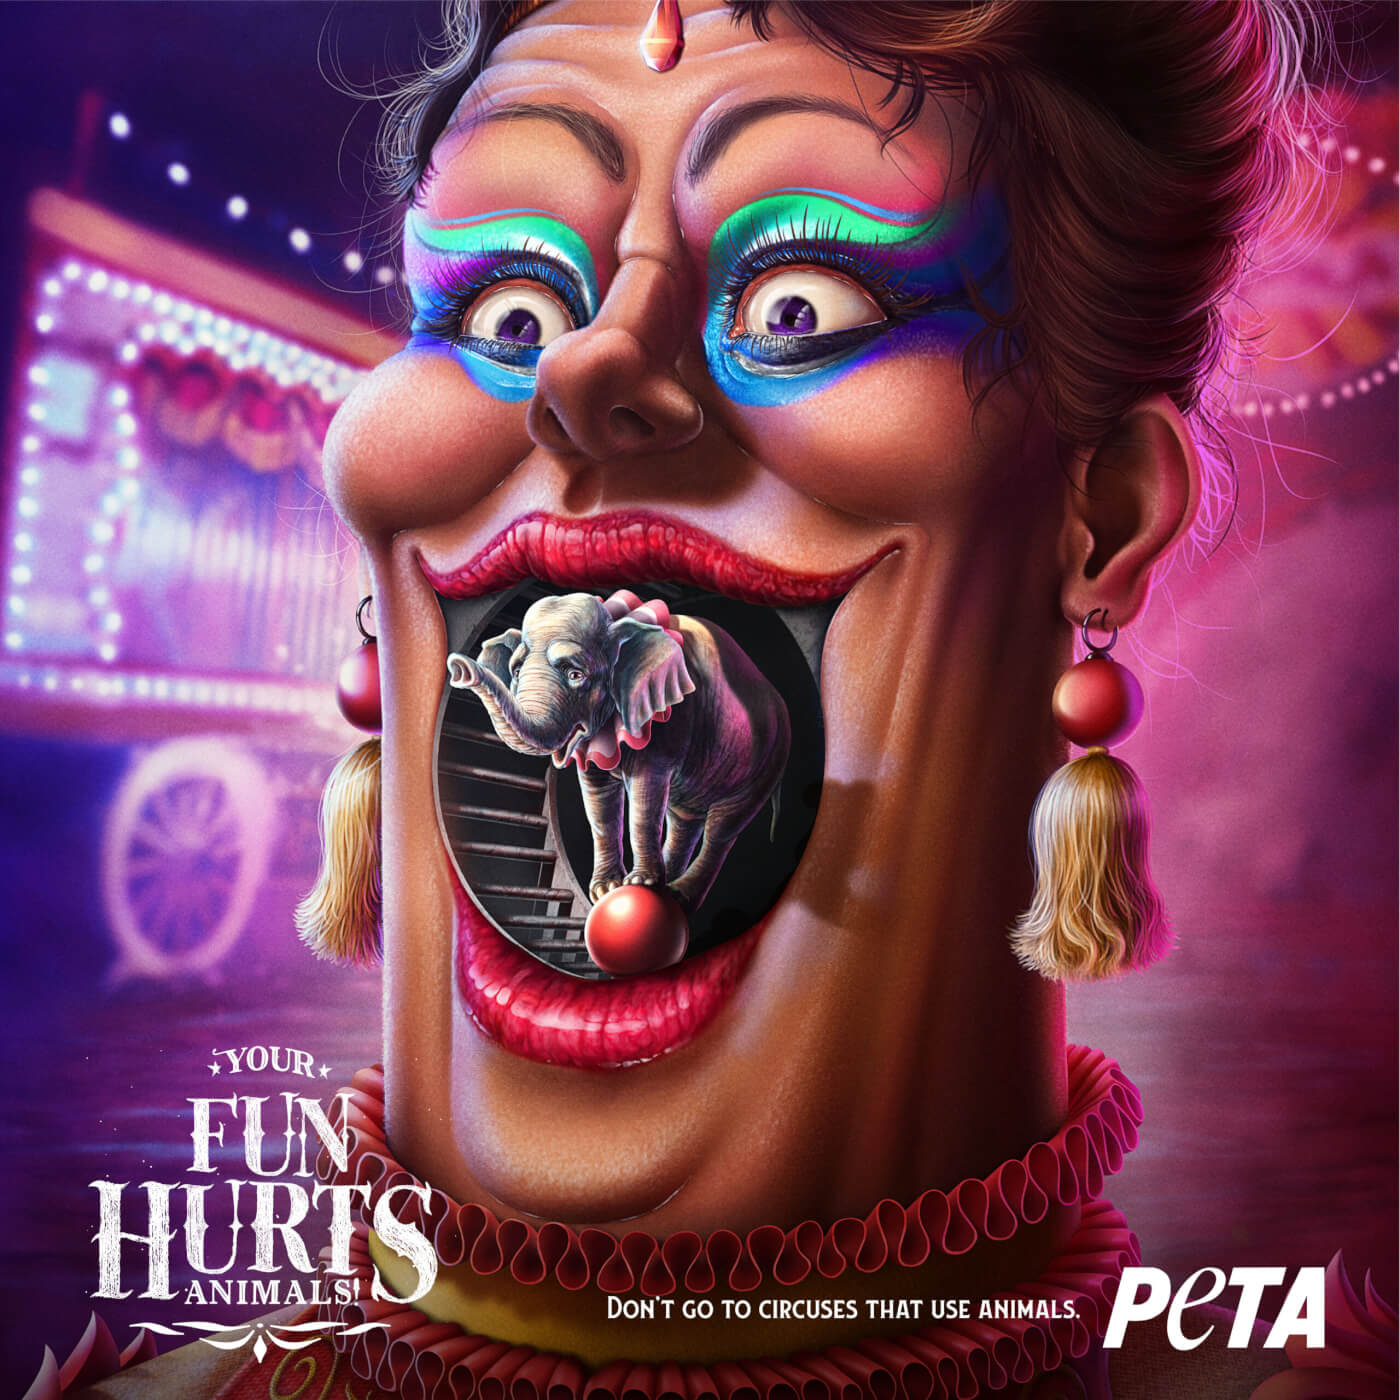 Your Fun Hurts: New Ad Campaign Shows Dark Side of Animal Circuses